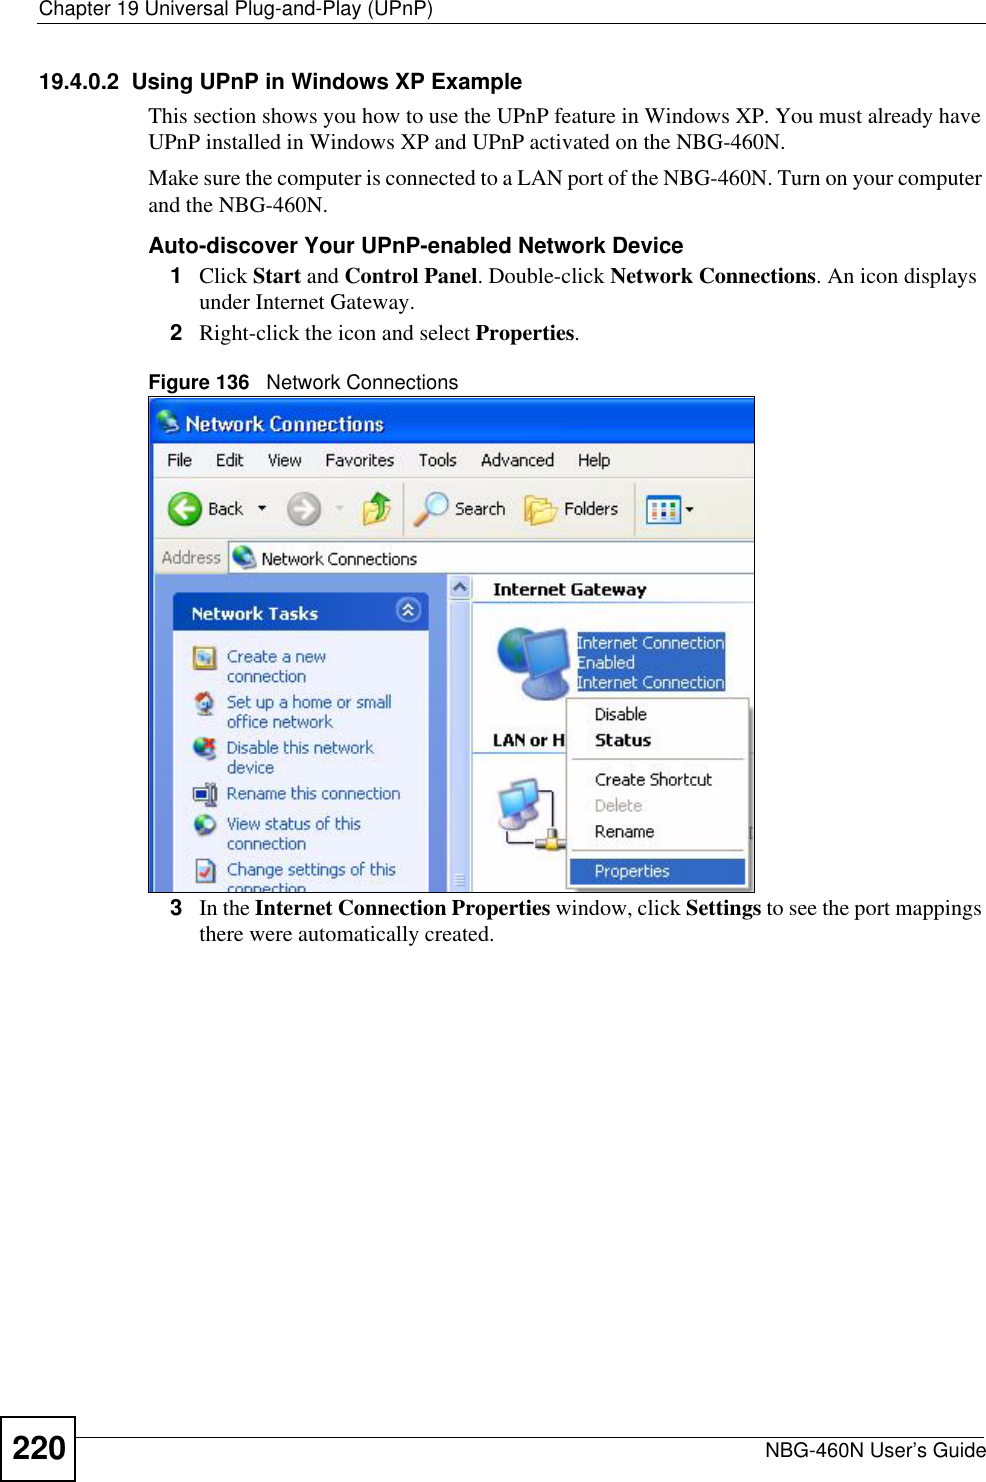 Chapter 19 Universal Plug-and-Play (UPnP)NBG-460N User’s Guide22019.4.0.2  Using UPnP in Windows XP ExampleThis section shows you how to use the UPnP feature in Windows XP. You must already have UPnP installed in Windows XP and UPnP activated on the NBG-460N.Make sure the computer is connected to a LAN port of the NBG-460N. Turn on your computer and the NBG-460N. Auto-discover Your UPnP-enabled Network Device1Click Start and Control Panel. Double-click Network Connections. An icon displays under Internet Gateway.2Right-click the icon and select Properties.Figure 136   Network Connections3In the Internet Connection Properties window, click Settings to see the port mappings there were automatically created. 